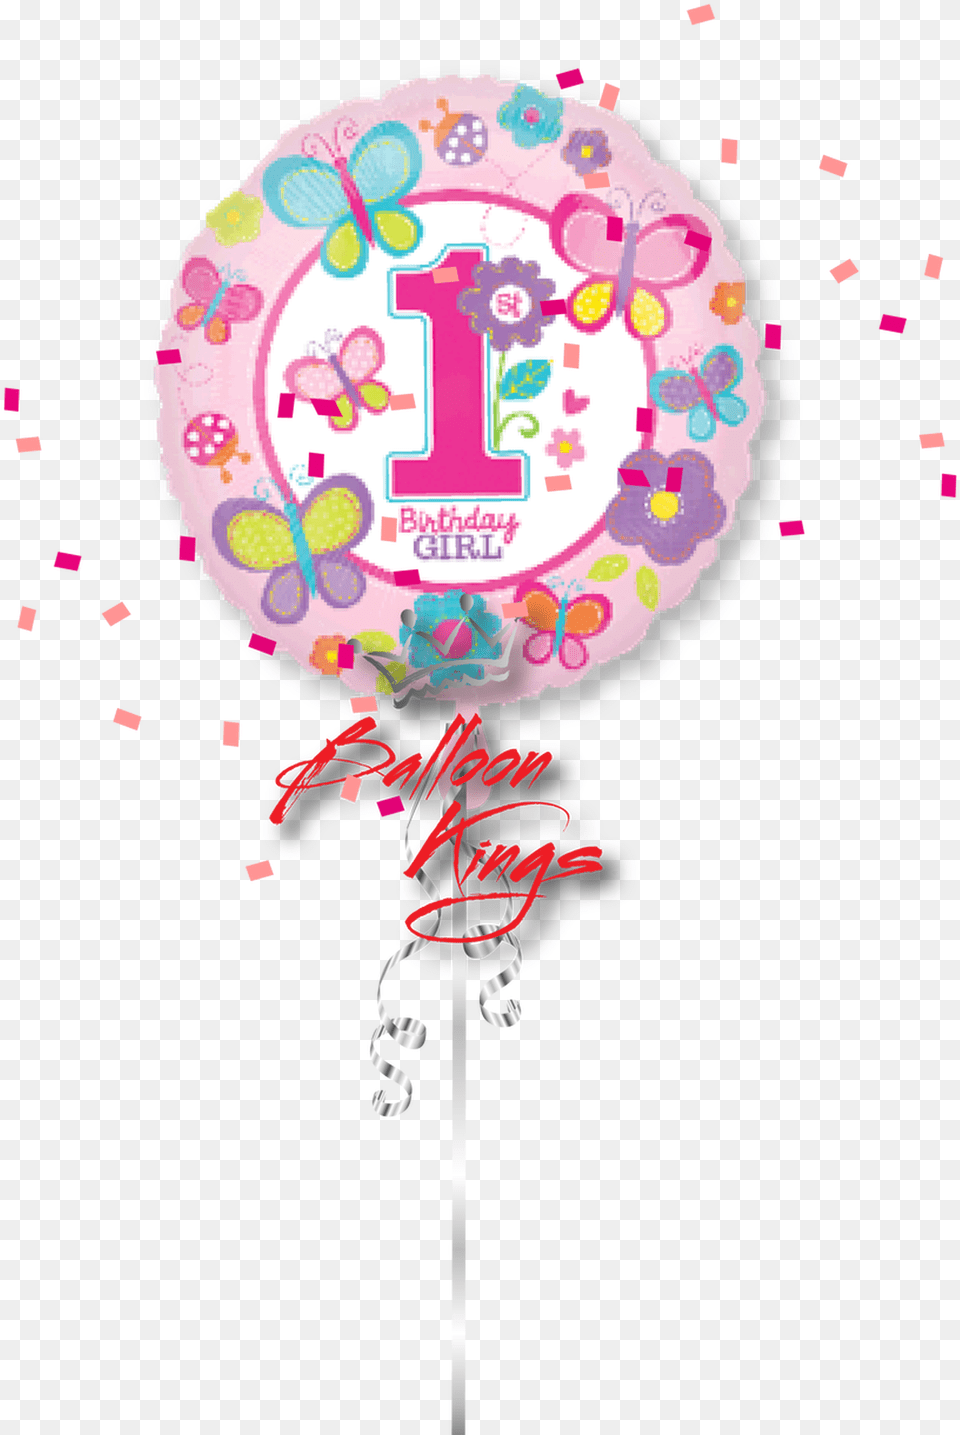 1st Birthday Sweet Girl Balloons For 1st Birthday, Food, Sweets, Balloon, Candy Png Image